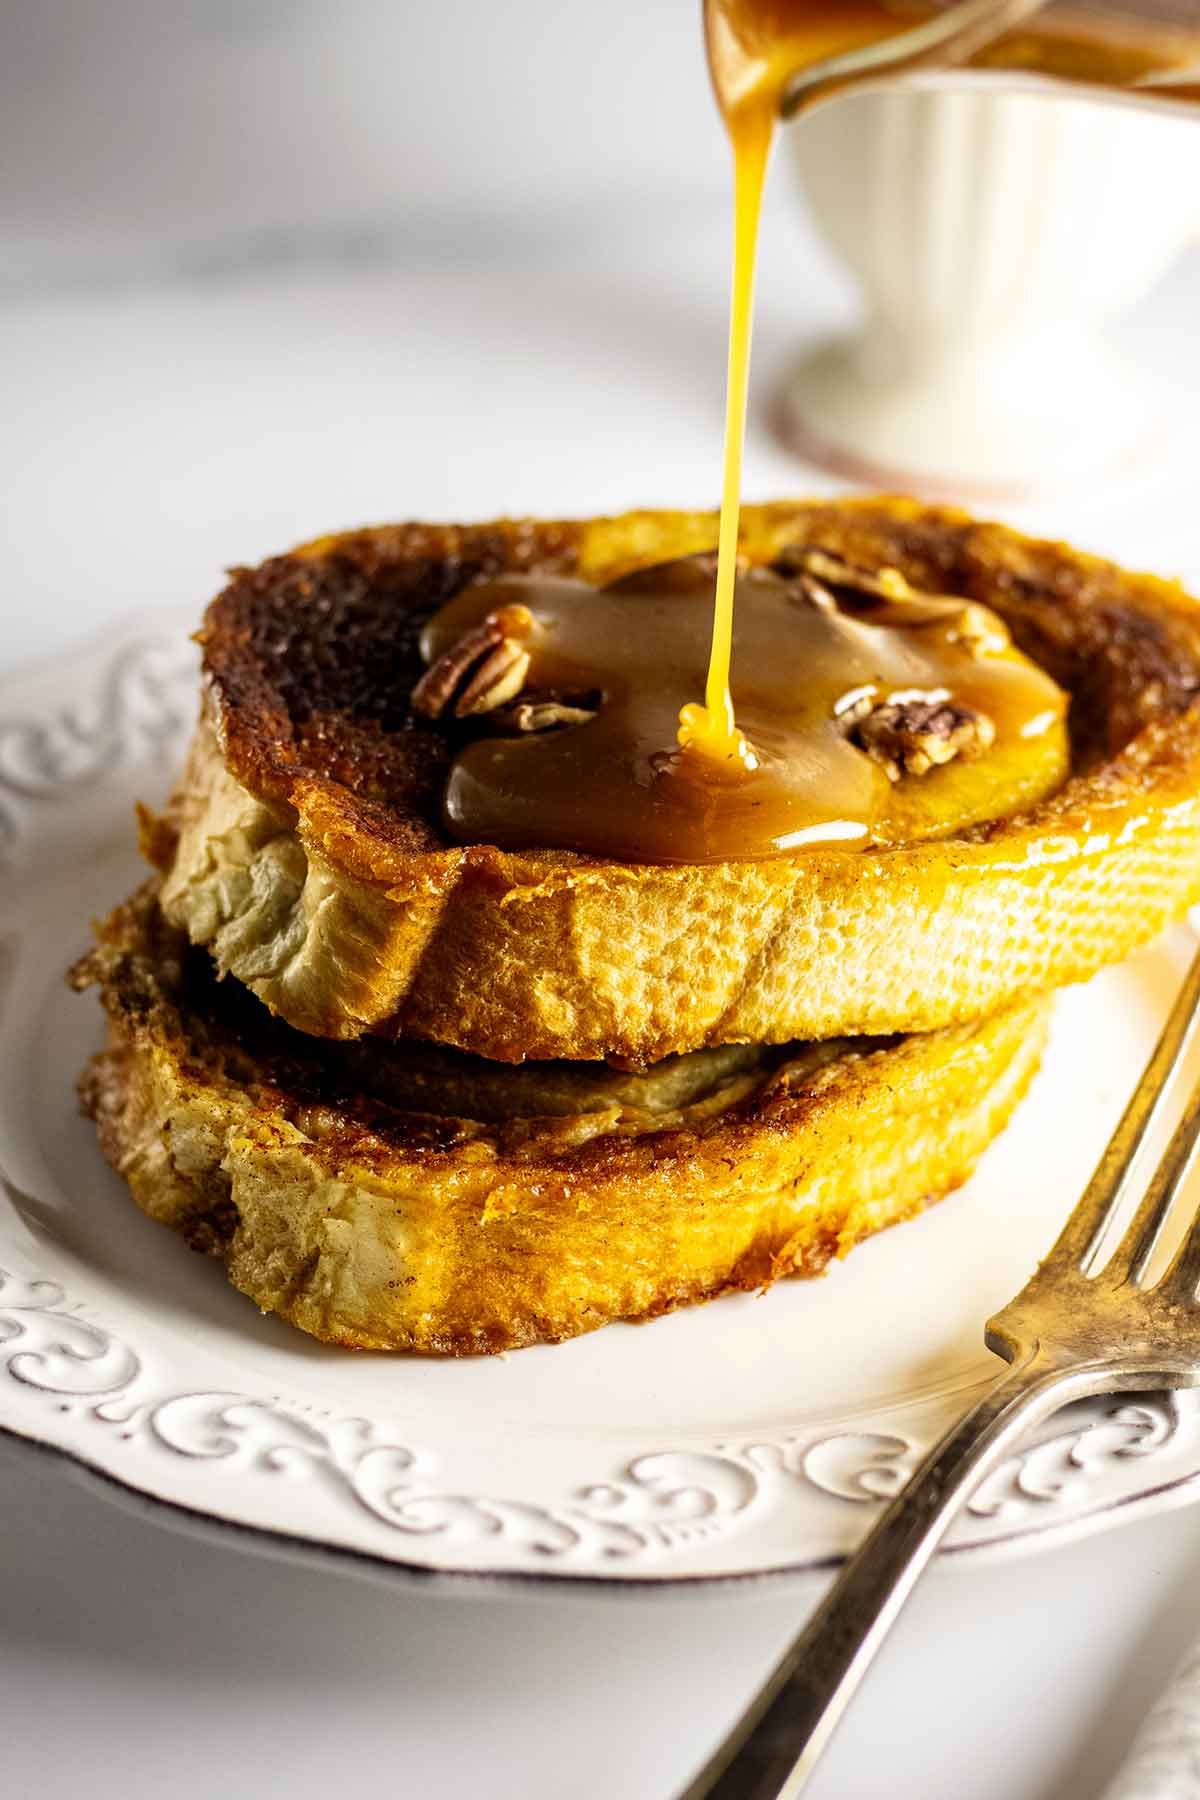 Caramel apple French toast topped with apple rings and chopped pecans on a white plate with fork. Caramel syrup is being poured over the top.